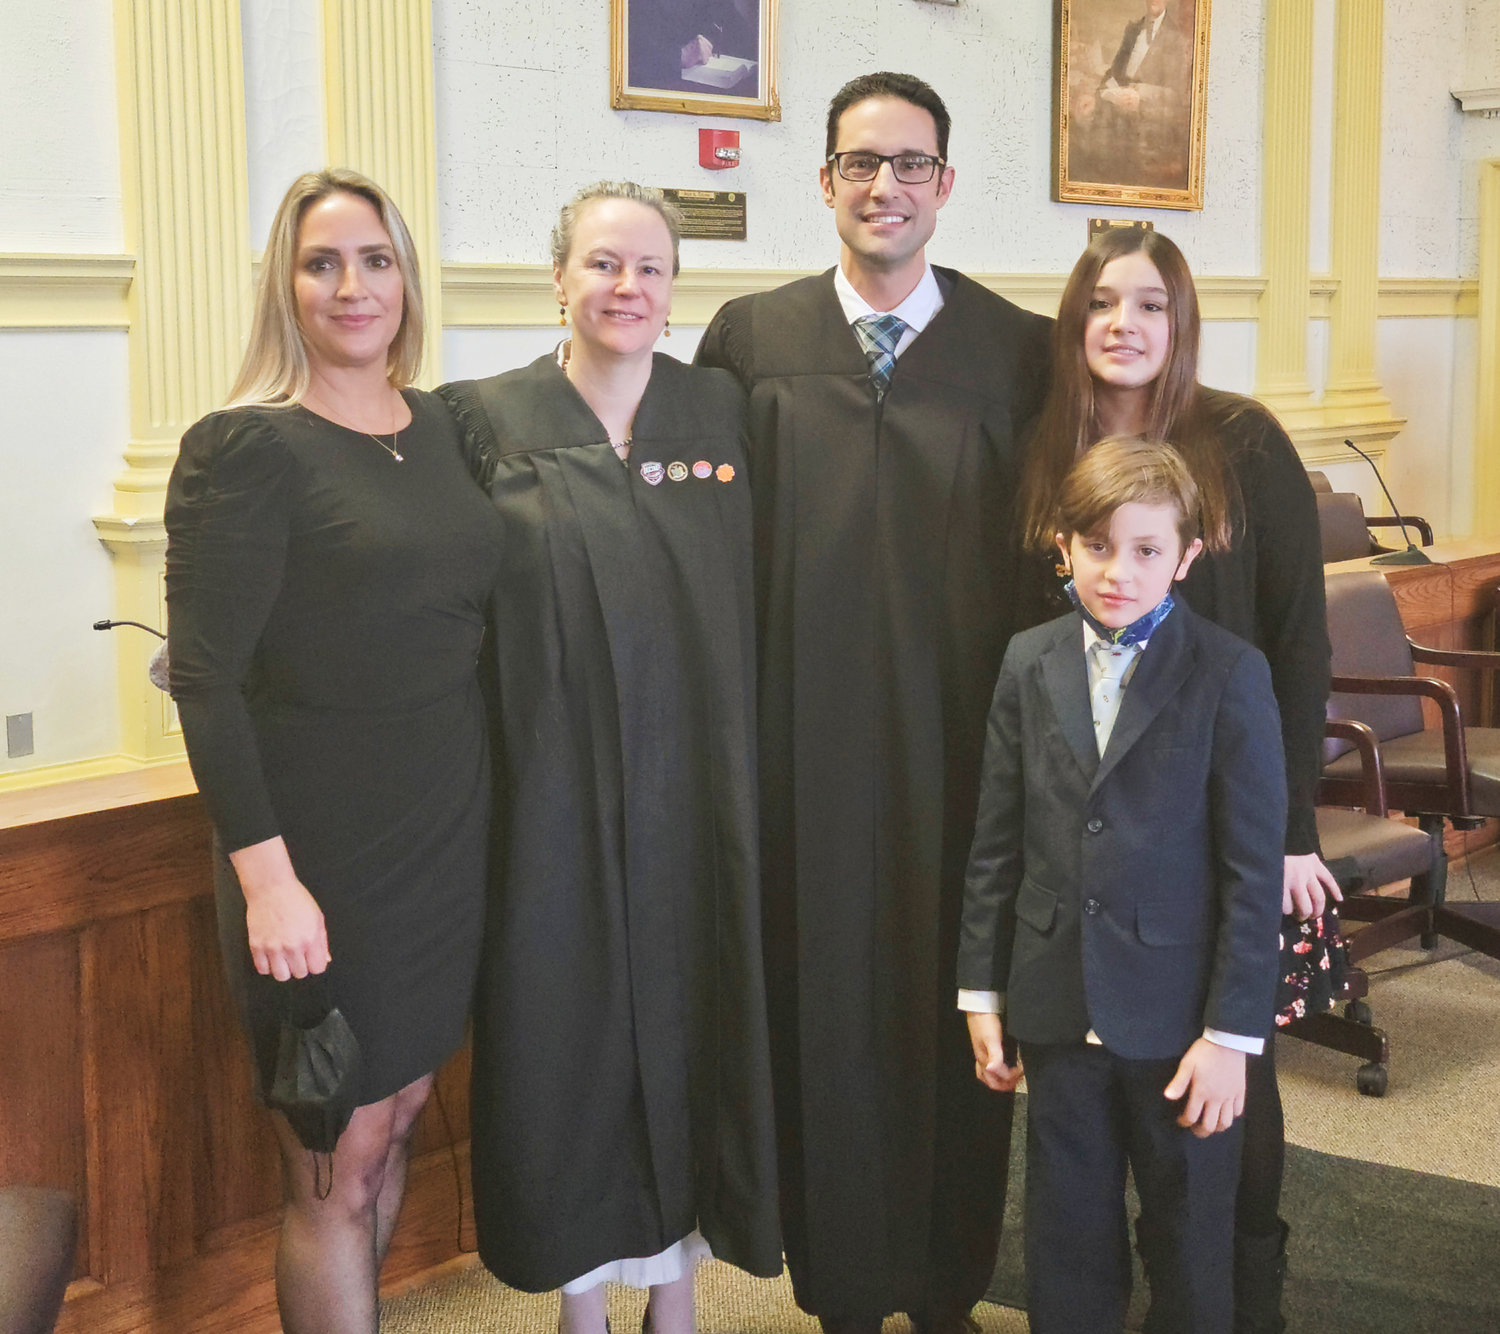 NEW JUDGE — Jason Flemma was sworn in as the newest Oneida County Family Court Judge on Wednesday in the Ceremonial Courtroom at the Oneida County Courthouse in Utica. Due to COVID-19 restrictions, the swearing in attendance was limited. Present were Flemma's wife Alana, daughter Isadora and son Sebastian. Oneida County Family Court Judge Julia M. Brouillette, officiated.